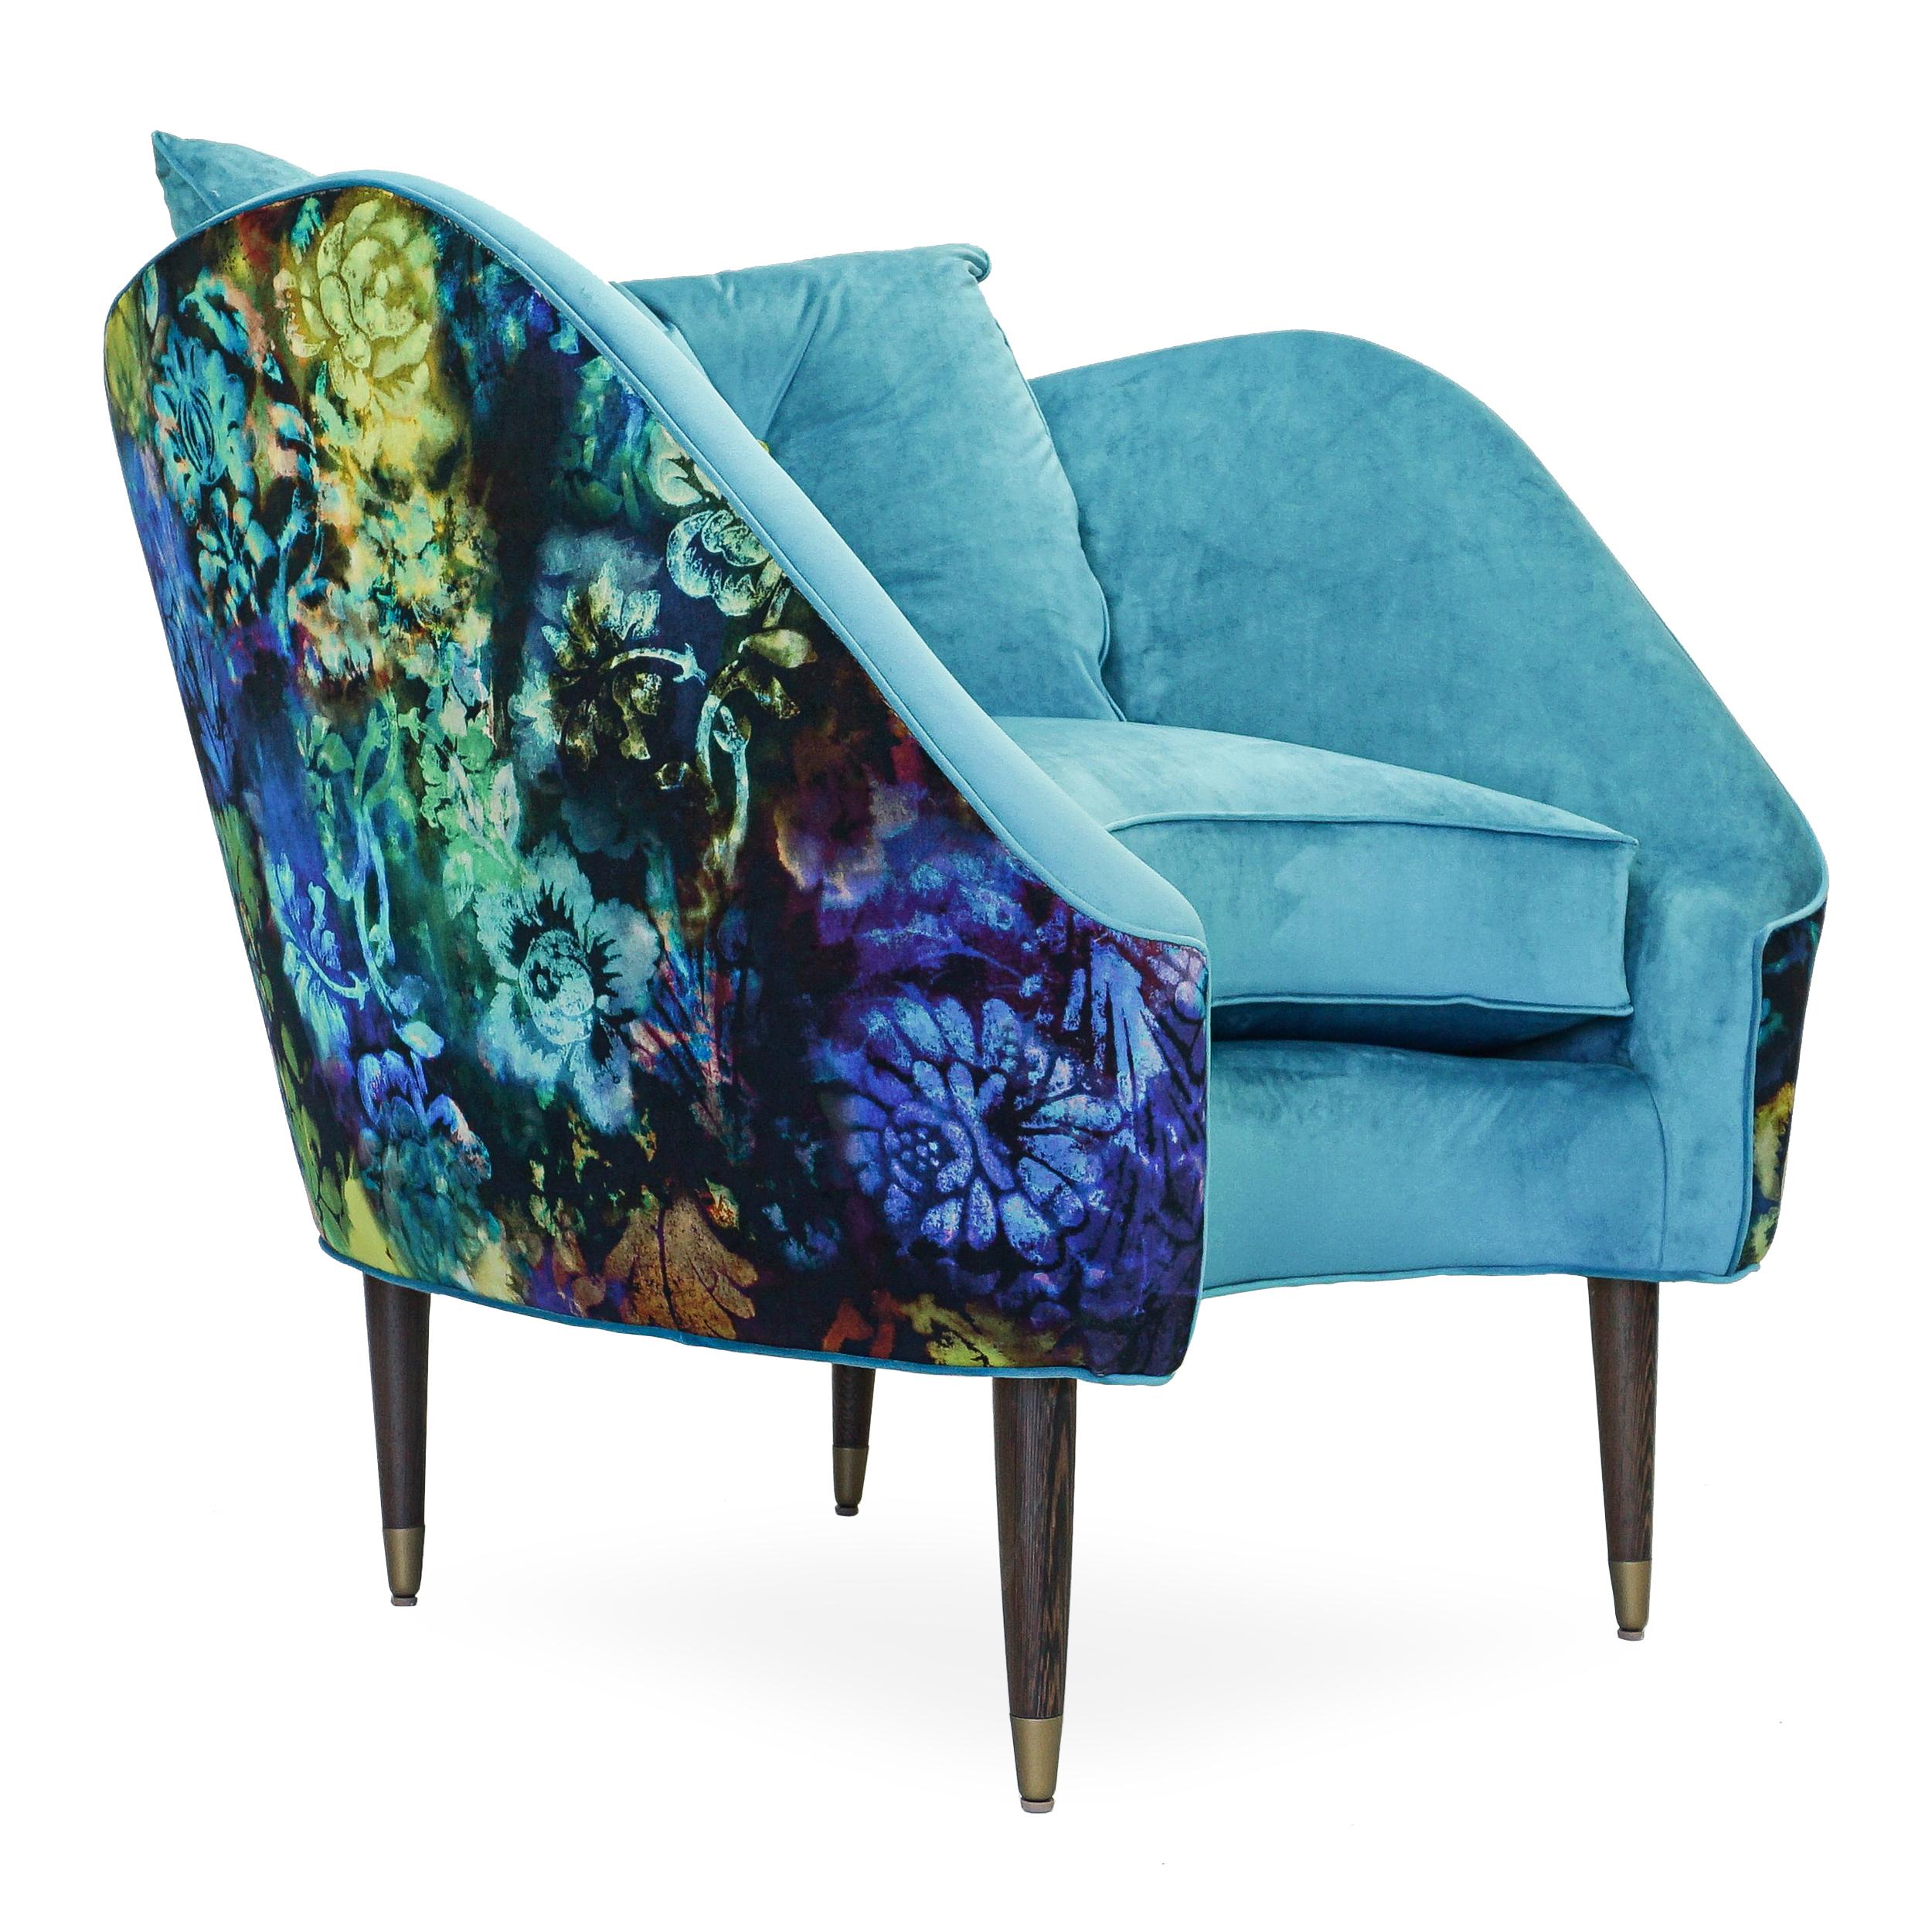 Designed by Jhon Ortiz and built in CT USA this chair is most defined by its curved profile. Shown with a turquoise velvet and with a psychedelic floral printed velvet on the outside back. Features brass sabots and a tufted back cushion. The chair